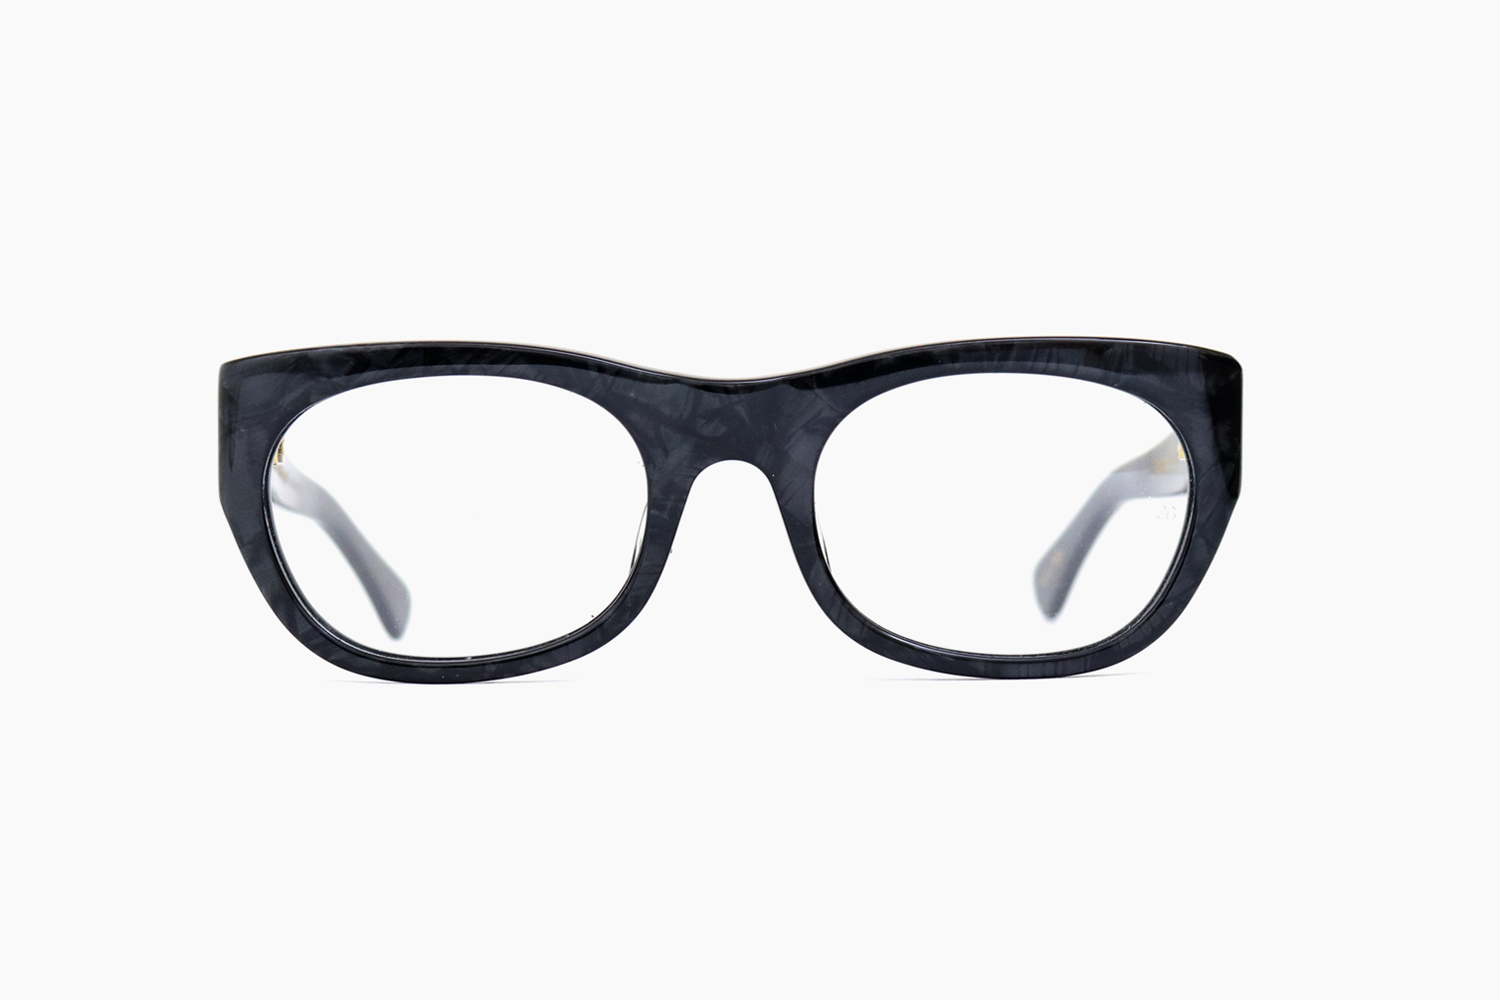 COUNSELLOR 51 - Marble Black｜OLIVER GOLDSMITH